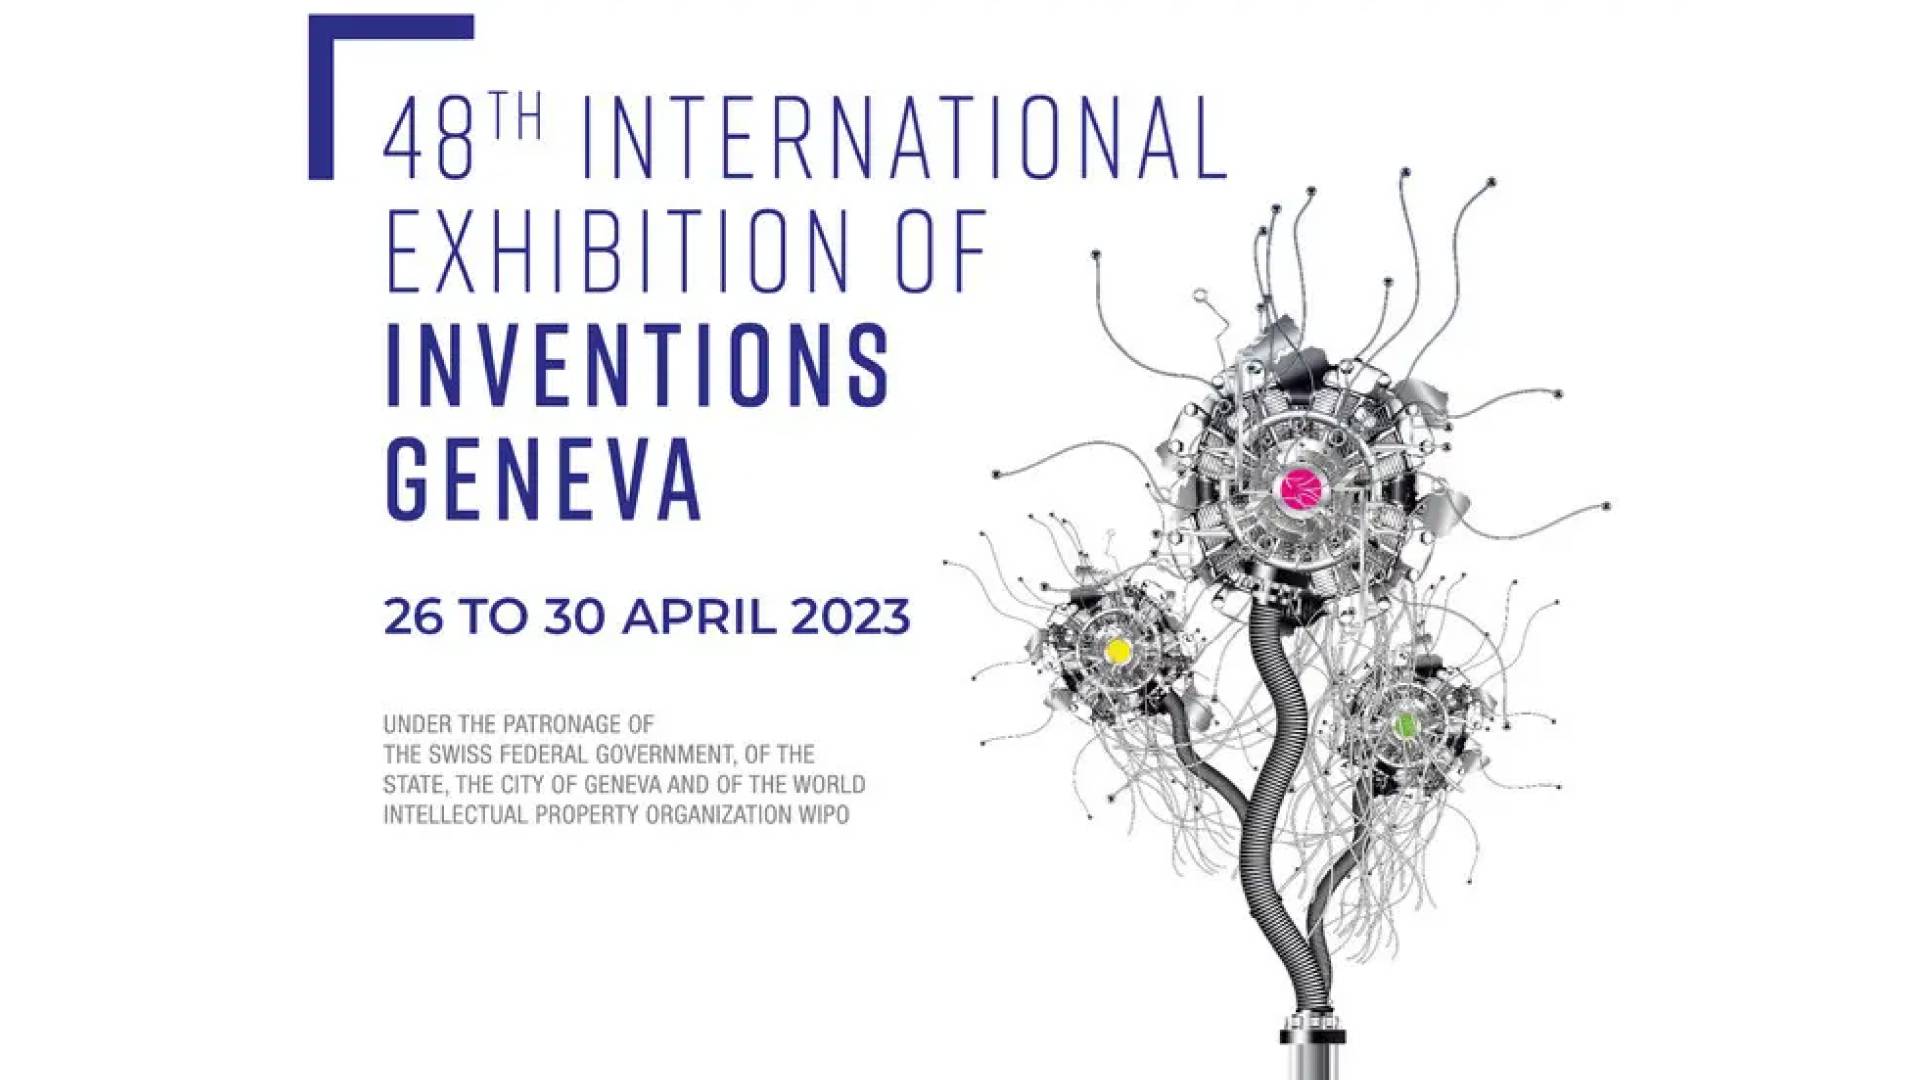 Siriraj Researchers Awarded Gold Medal for Innovative Medical AI Project at “The 48th International Exhibition of Inventions Geneva”!